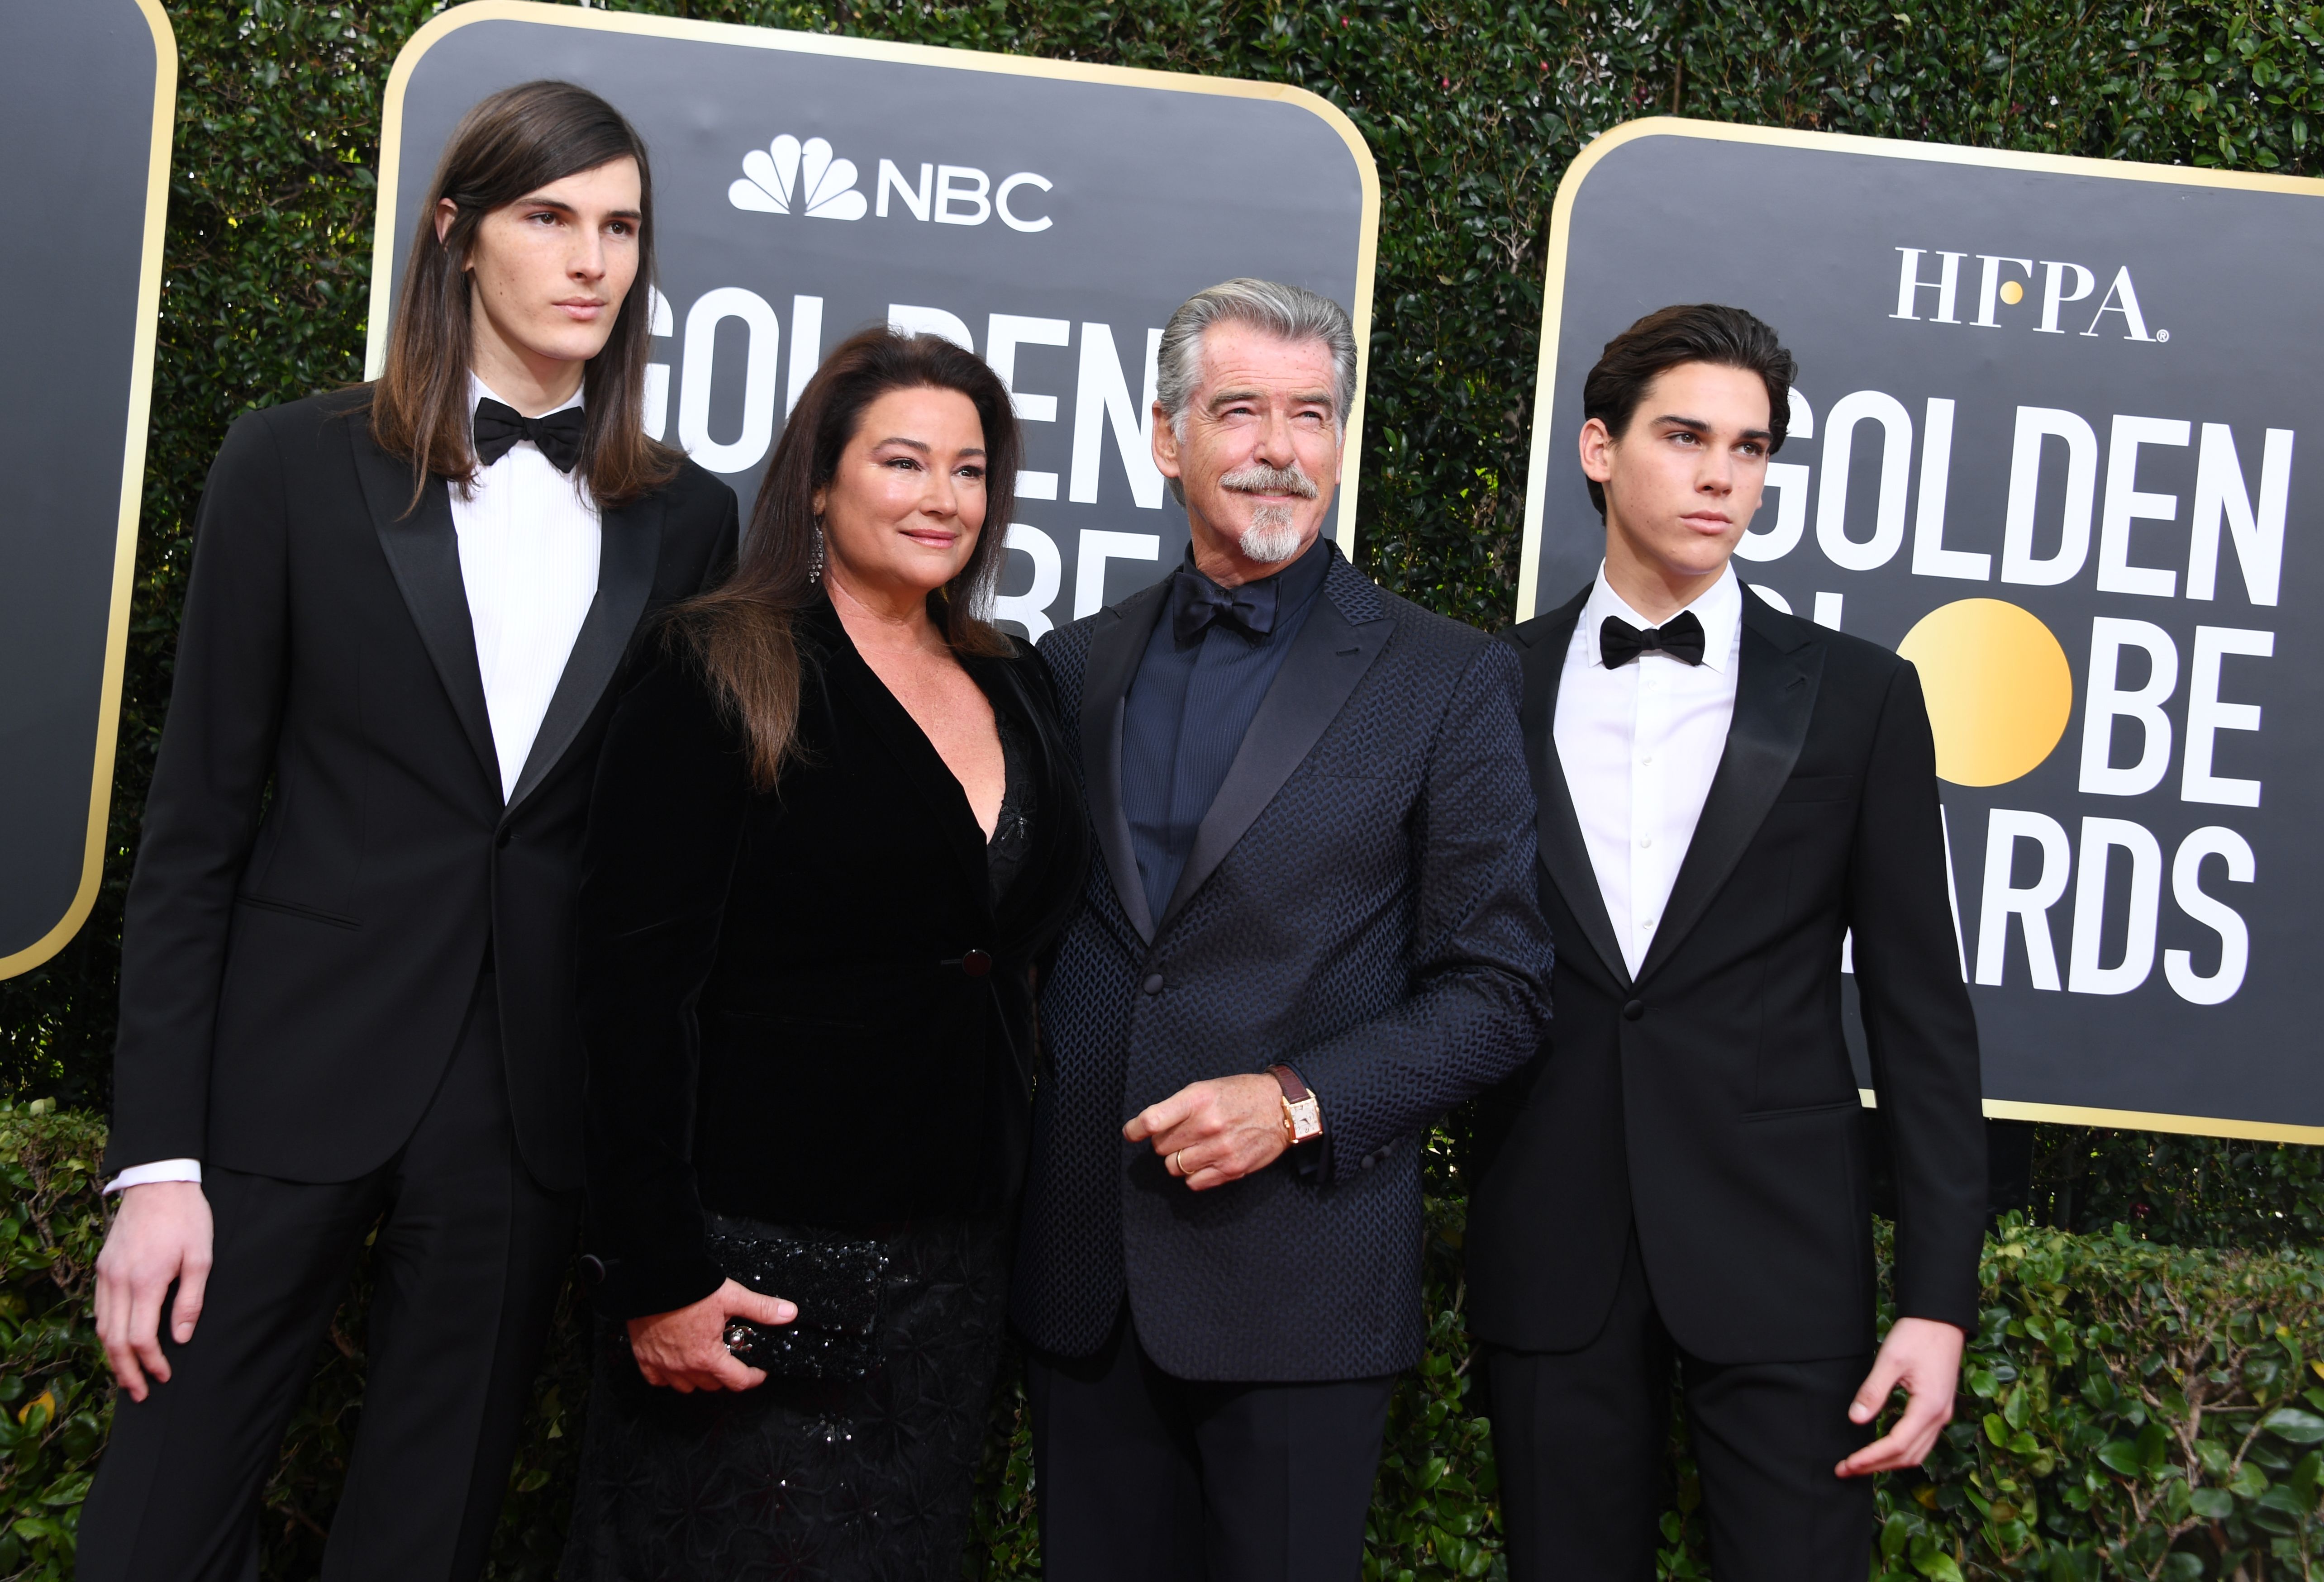 From left to right: Dylan Brosnan, Keely Shaye Smith, Pierce Brosnan, and Paris Brosnan